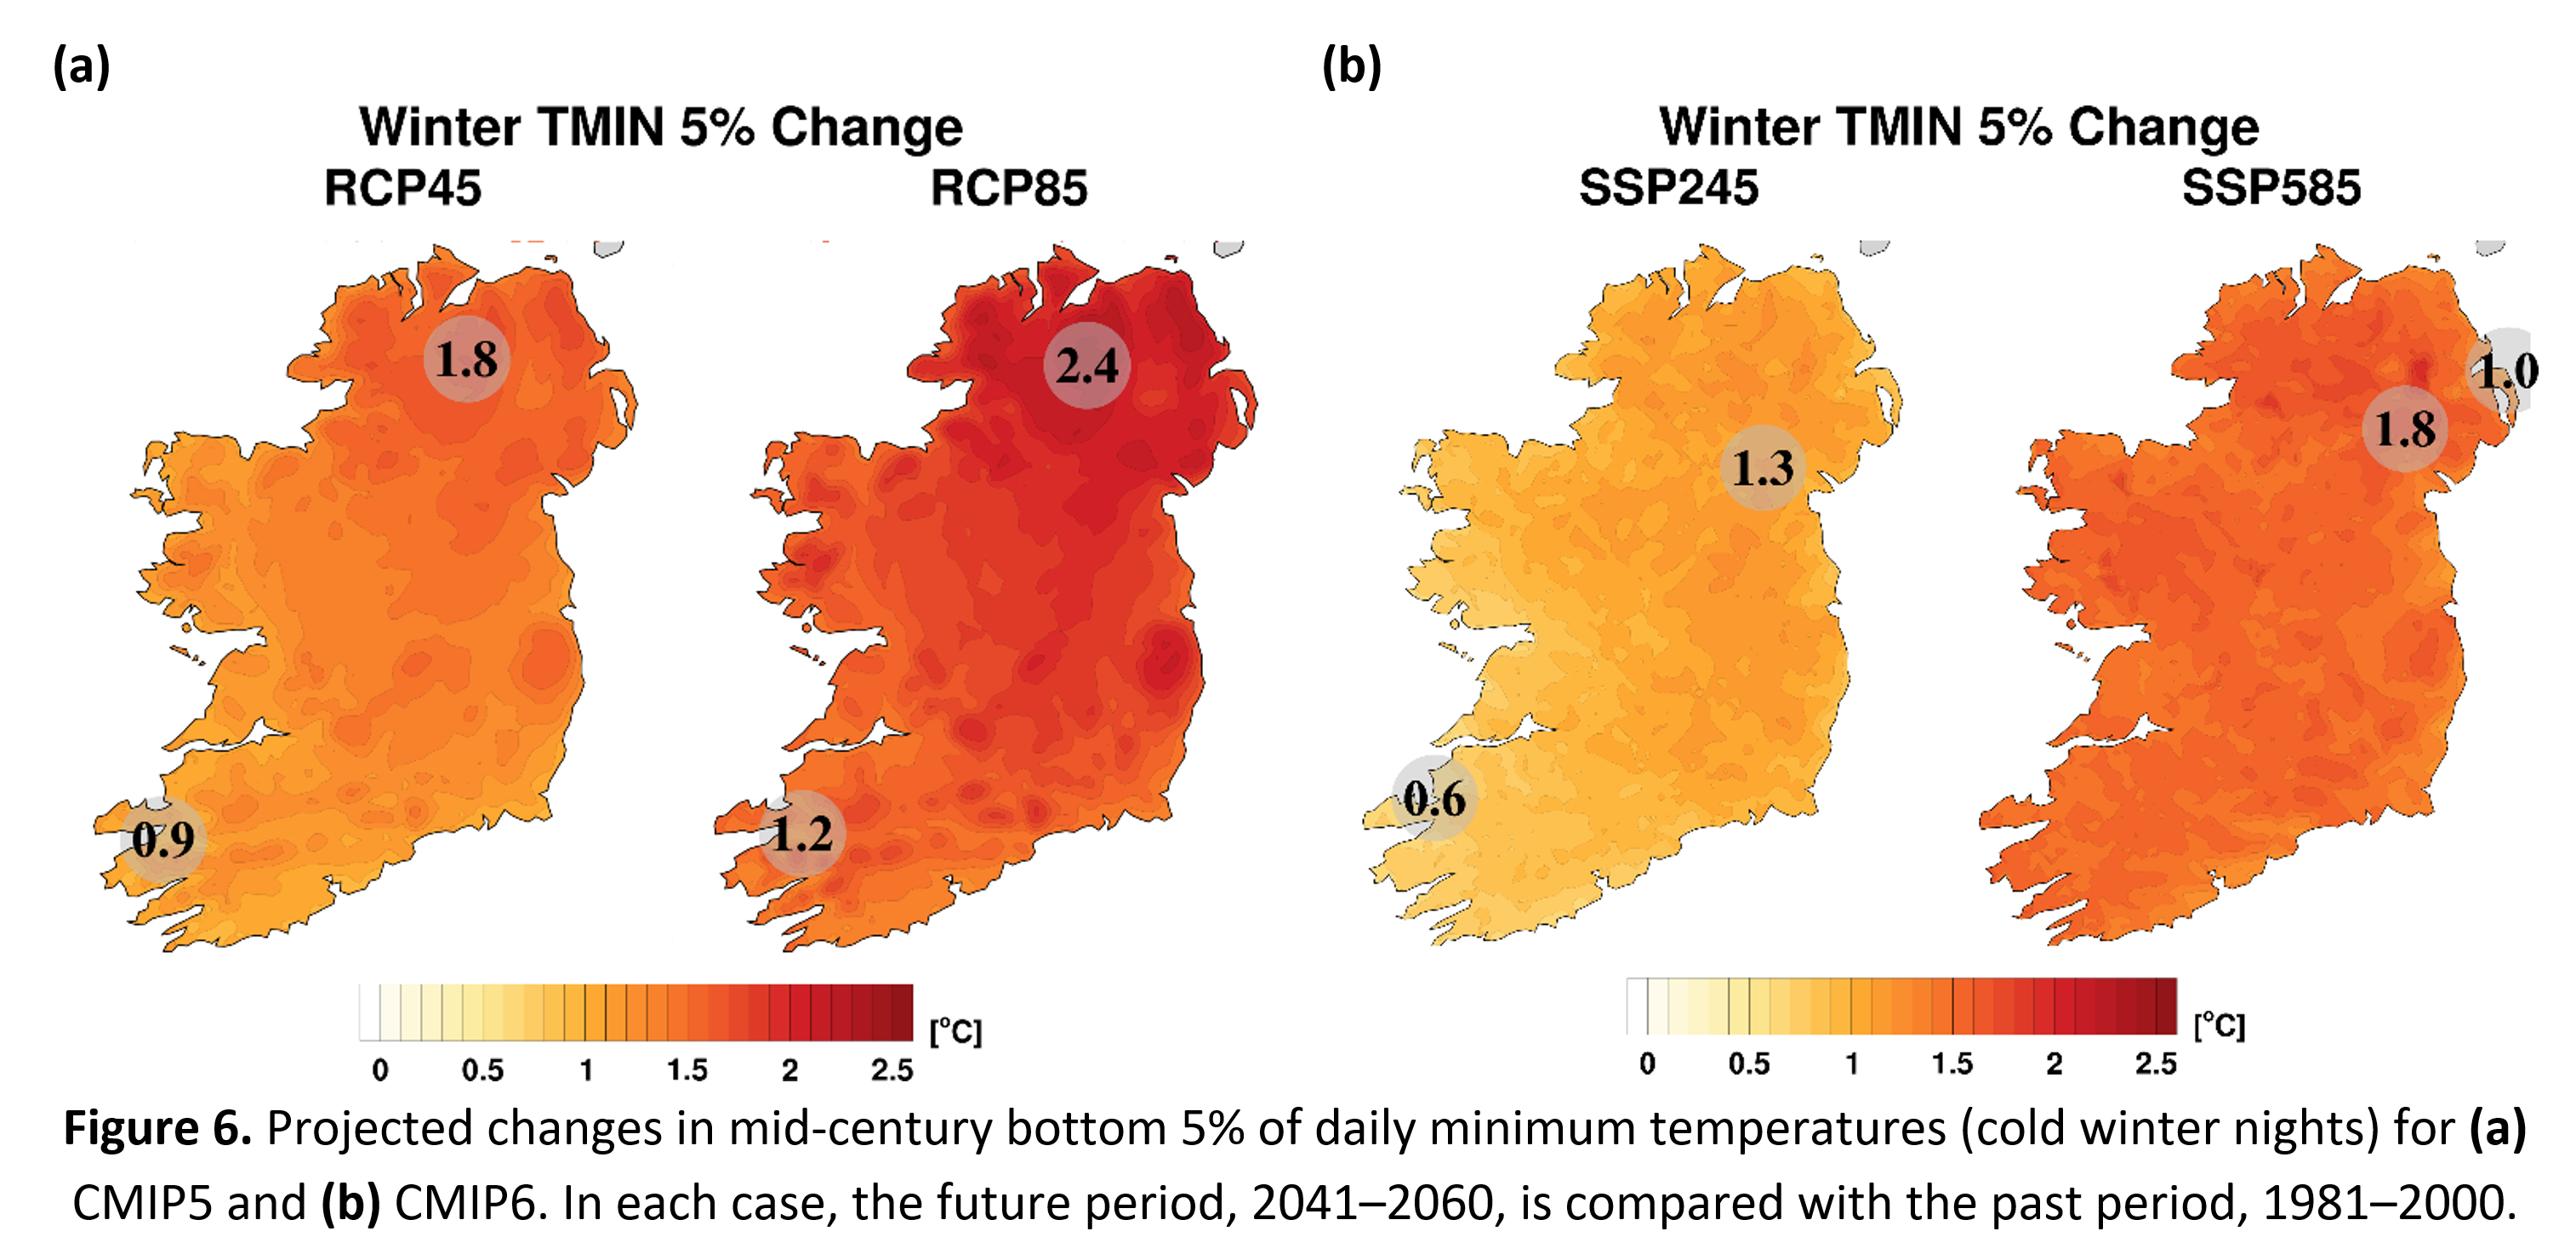 Figure 6. Projected changes in mid-century bottom 5% of daily minimum temperatures (cold winter nights) for (a) CMIP5 and (b) CMIP6. In each case, the future period, 2041–2060, is compared with the past period, 1981–2000.